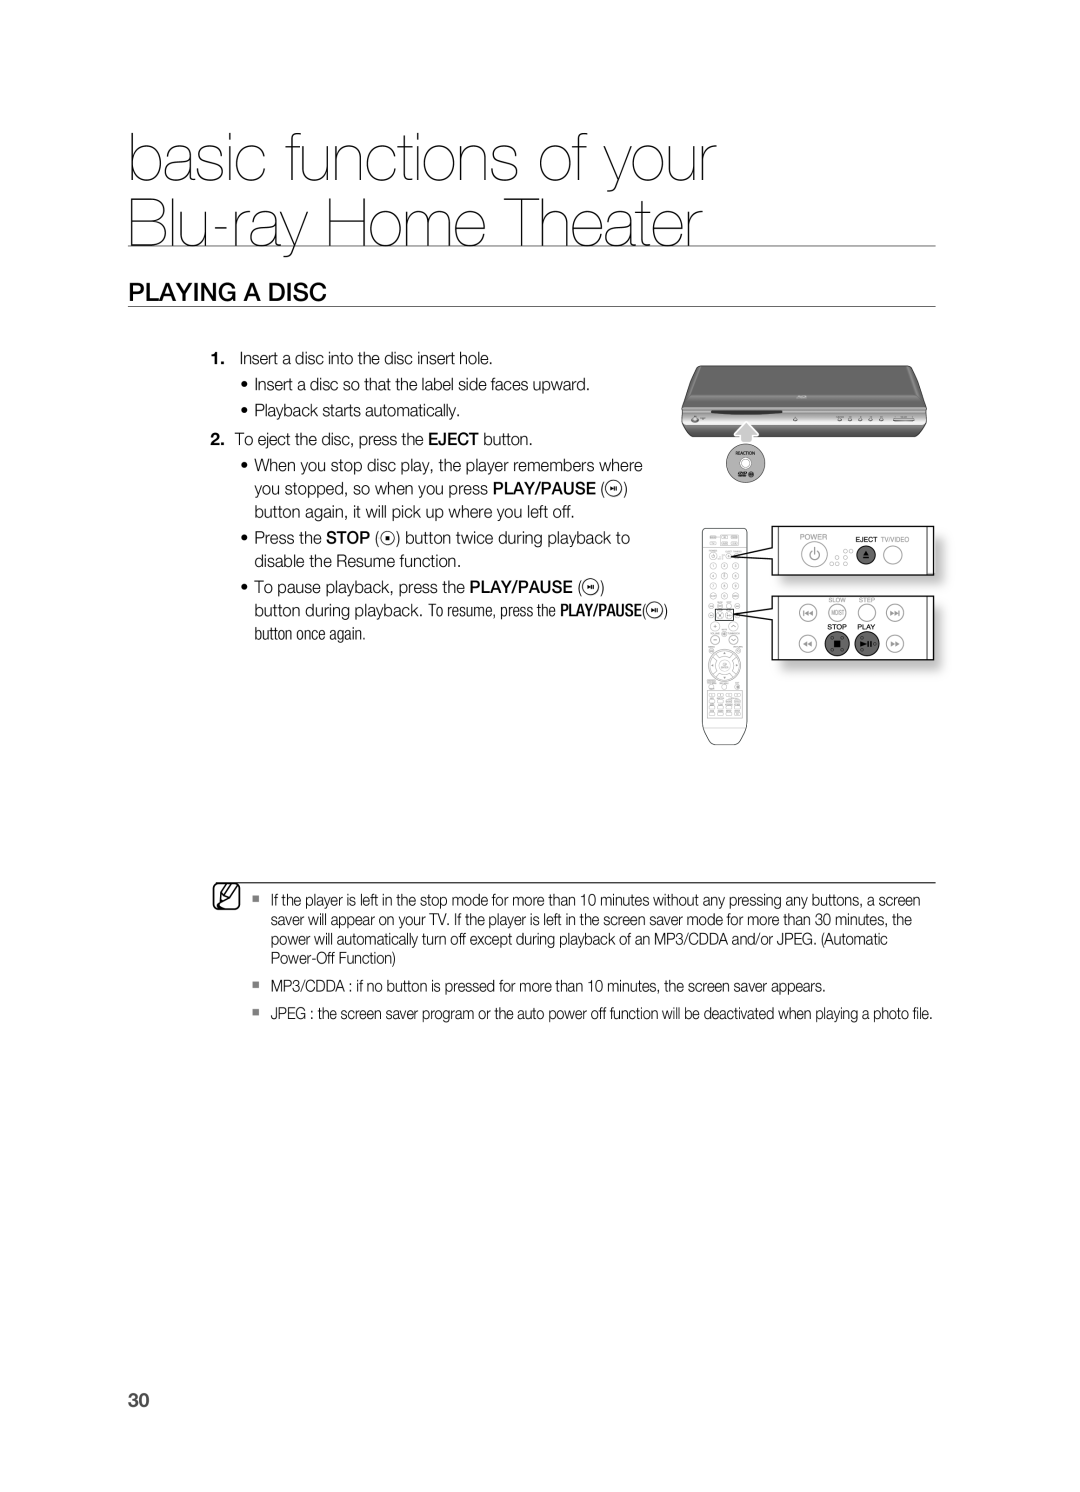 Samsung AH68-02019S manual PLAYIng A DISC, basic functions of your Blu-rayHome Theater 